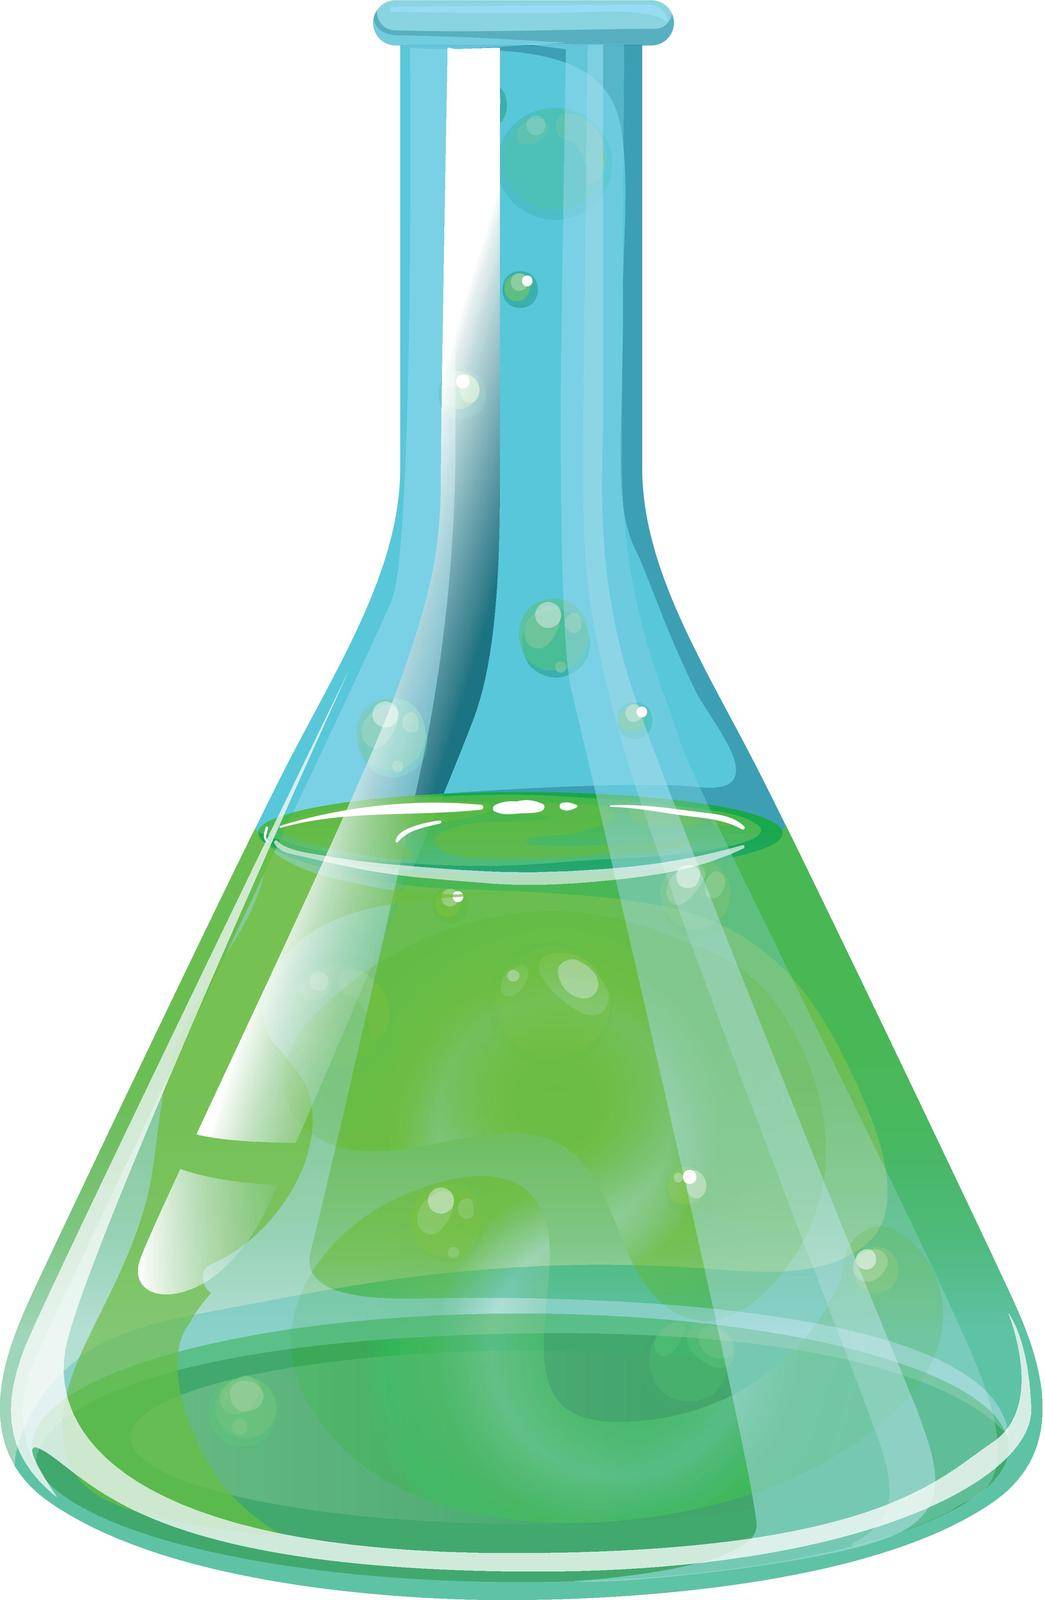 Illustration of a laboratory flask on a white background